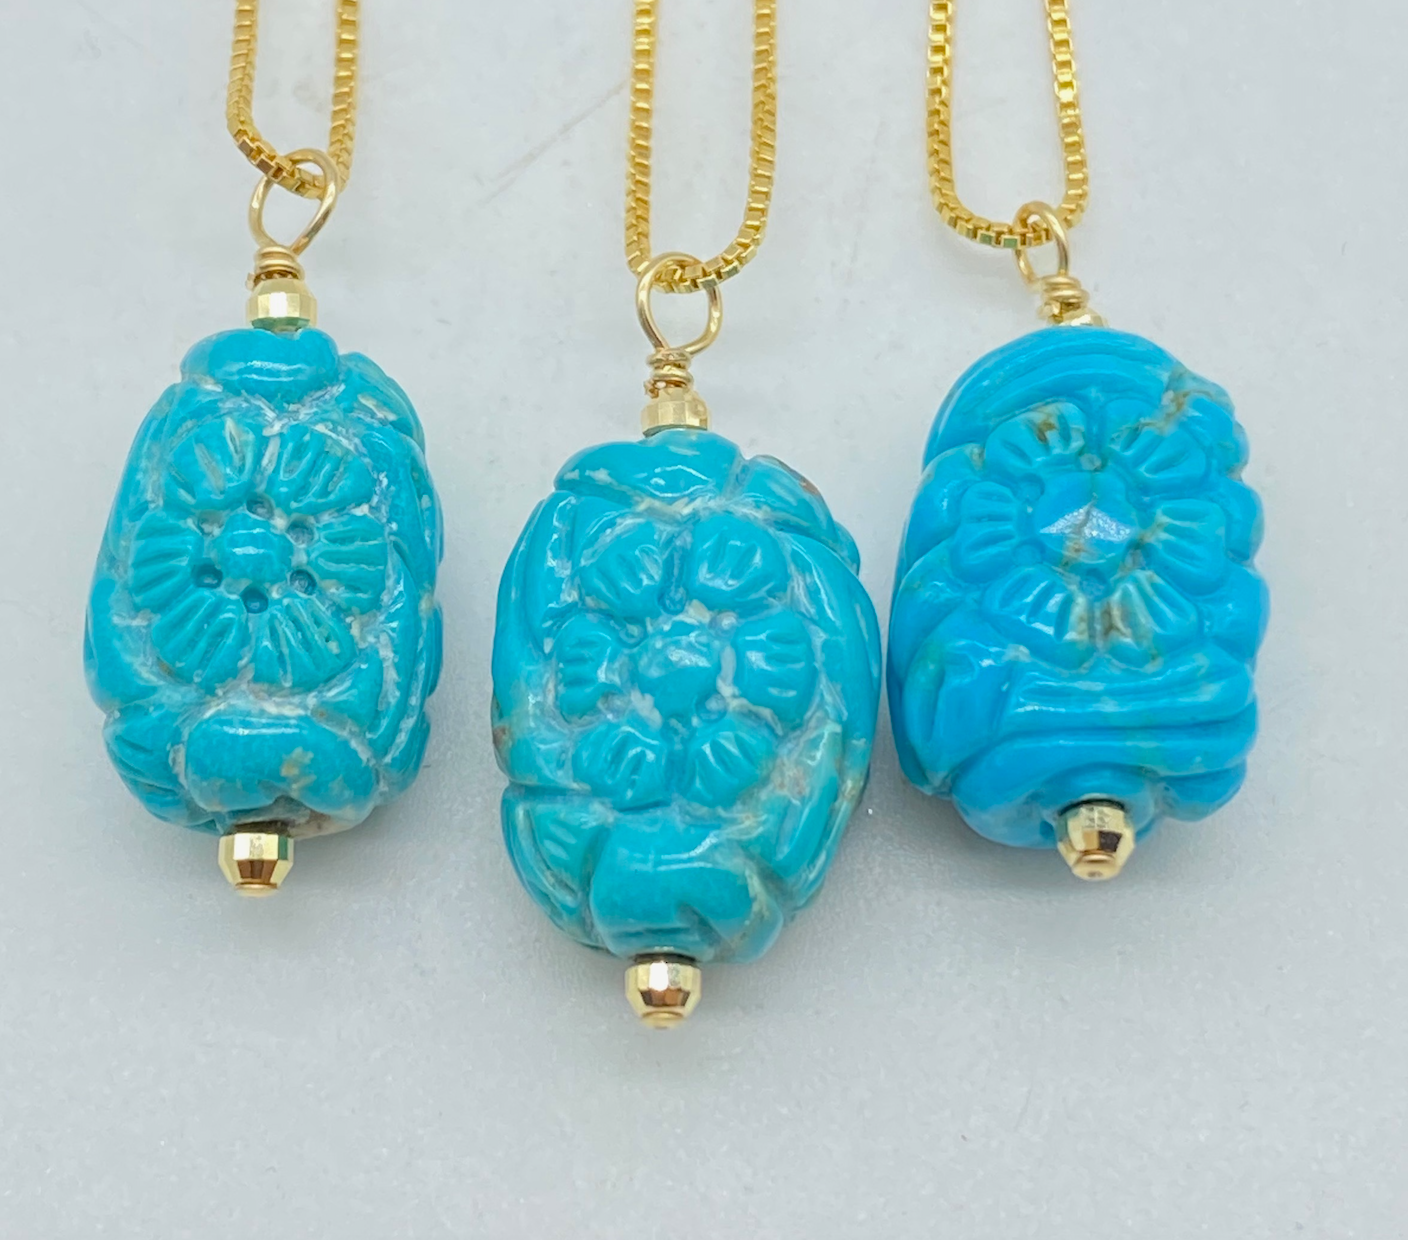 TURQUOISE FLOWER AMULET FREE WITH PURCHASE